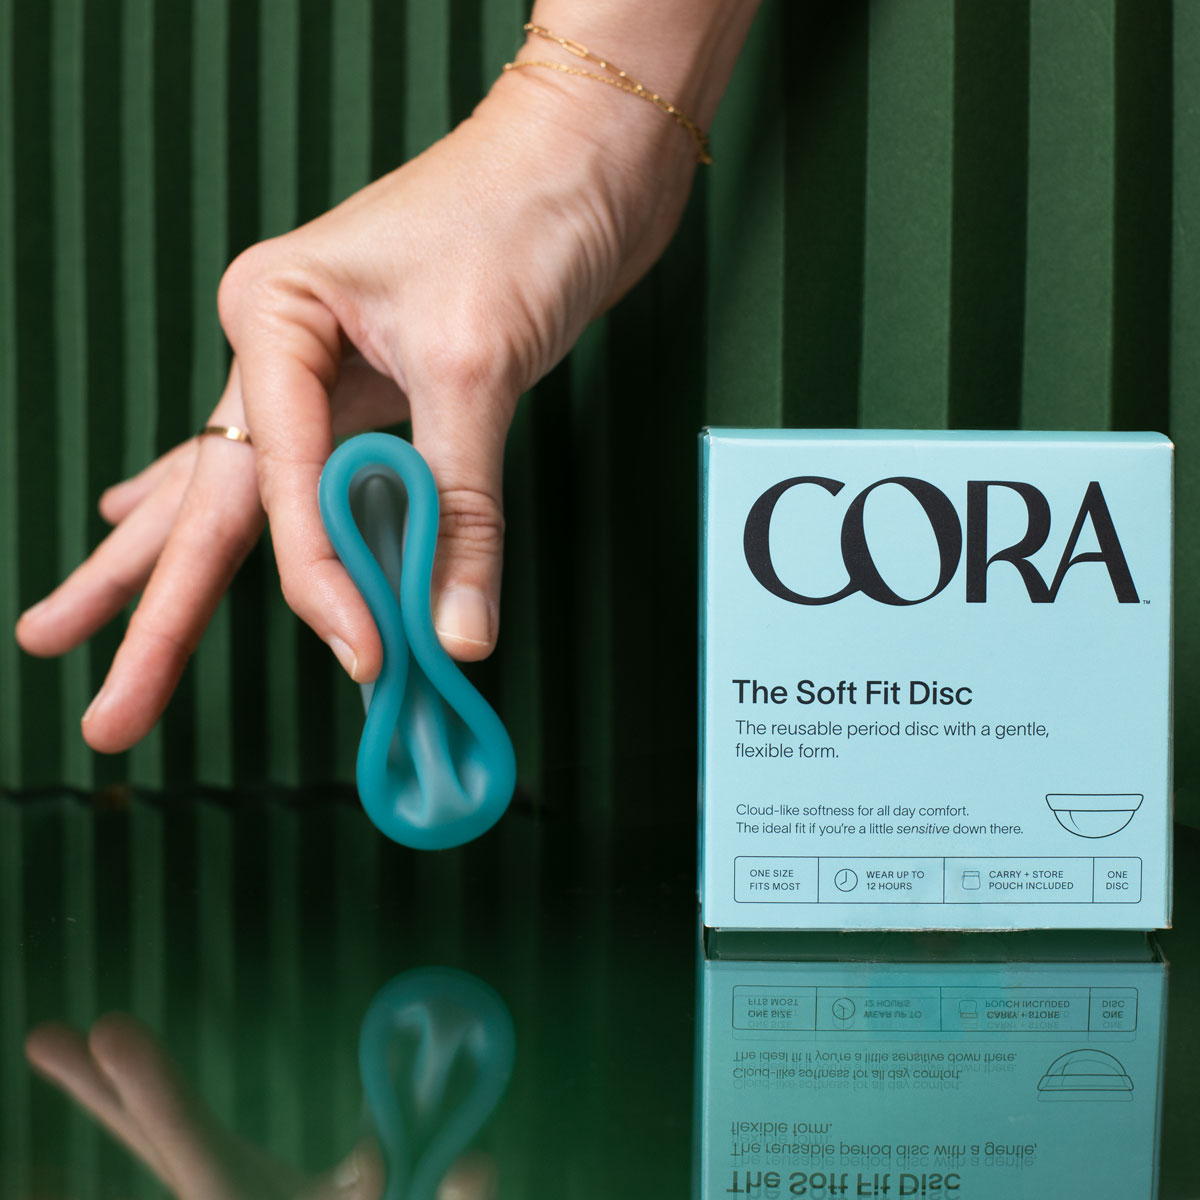  Cora Menstrual Disc, Reusable Period Disc, Wear Up to  12-Hours, Sustainable Alternative to Tampons/Pads, for Light/Heavy Flows, Leak Proof, Medical Grade Silicone